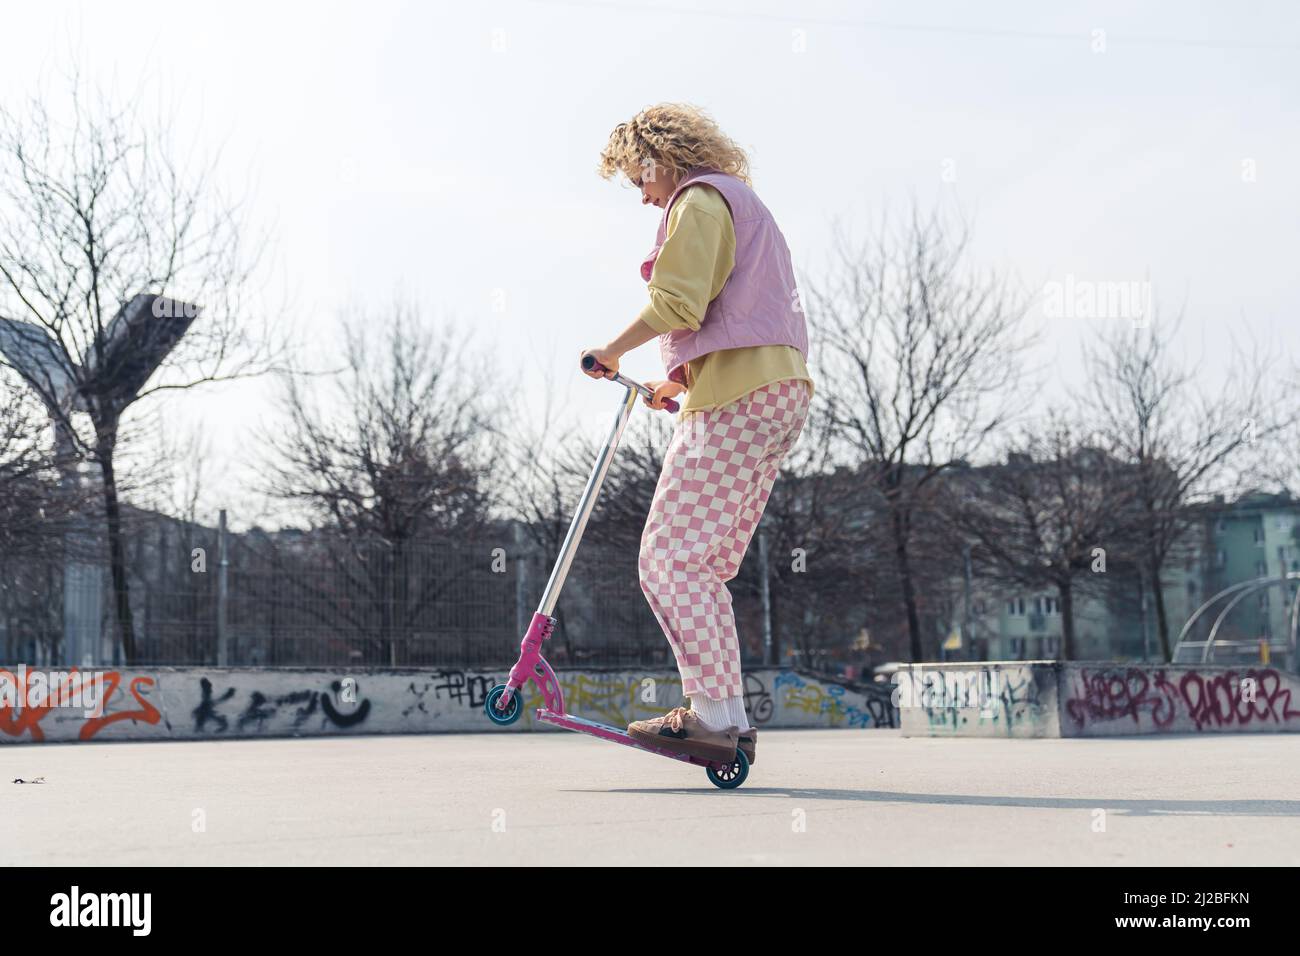 Pretty young blond curly haired woman drives a pink scooter on the skateboard ground casual attire copy space full shot . High quality photo Stock Photo